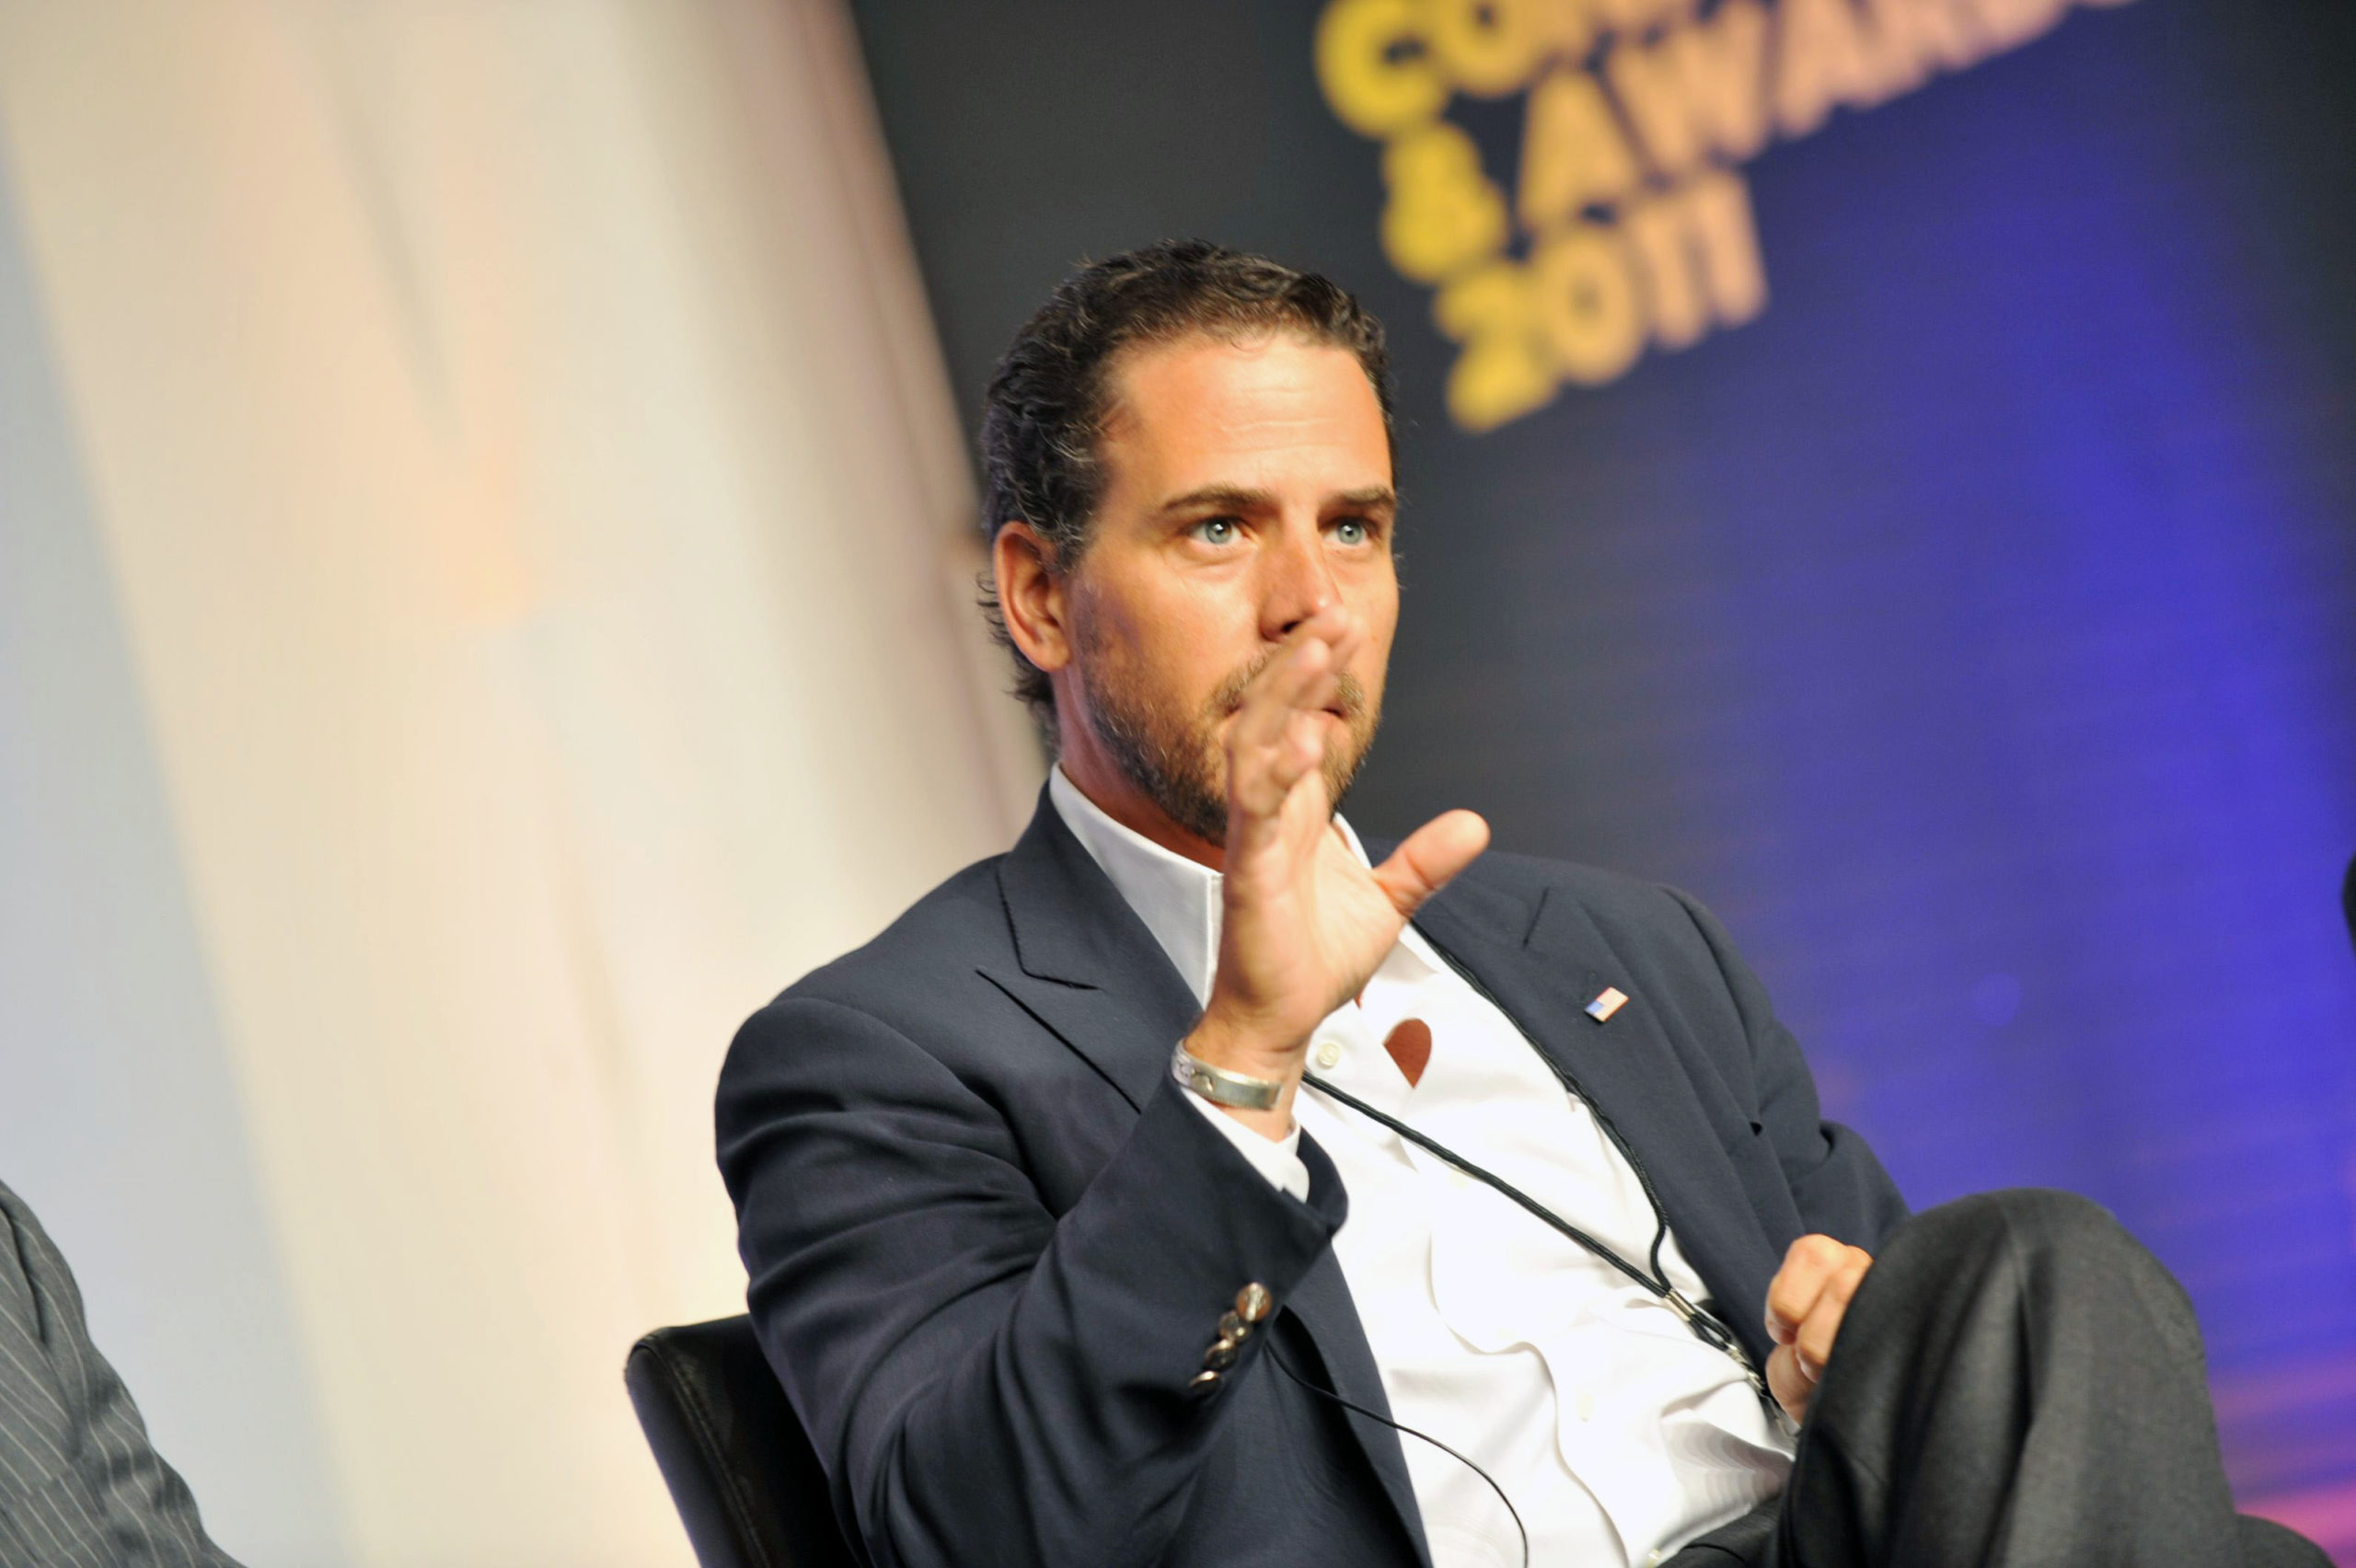 ATLANTA, GA - JULY 22: Hunter Biden attends Usher's New Look Foundation - World Leadership Conference & Awards 2011 - Day 3 at Cobb Energy Center on July 22, 2011 in Atlanta, Georgia. (Photo by Moses Robinson/Getty Images for Usher's New Look Foundation)